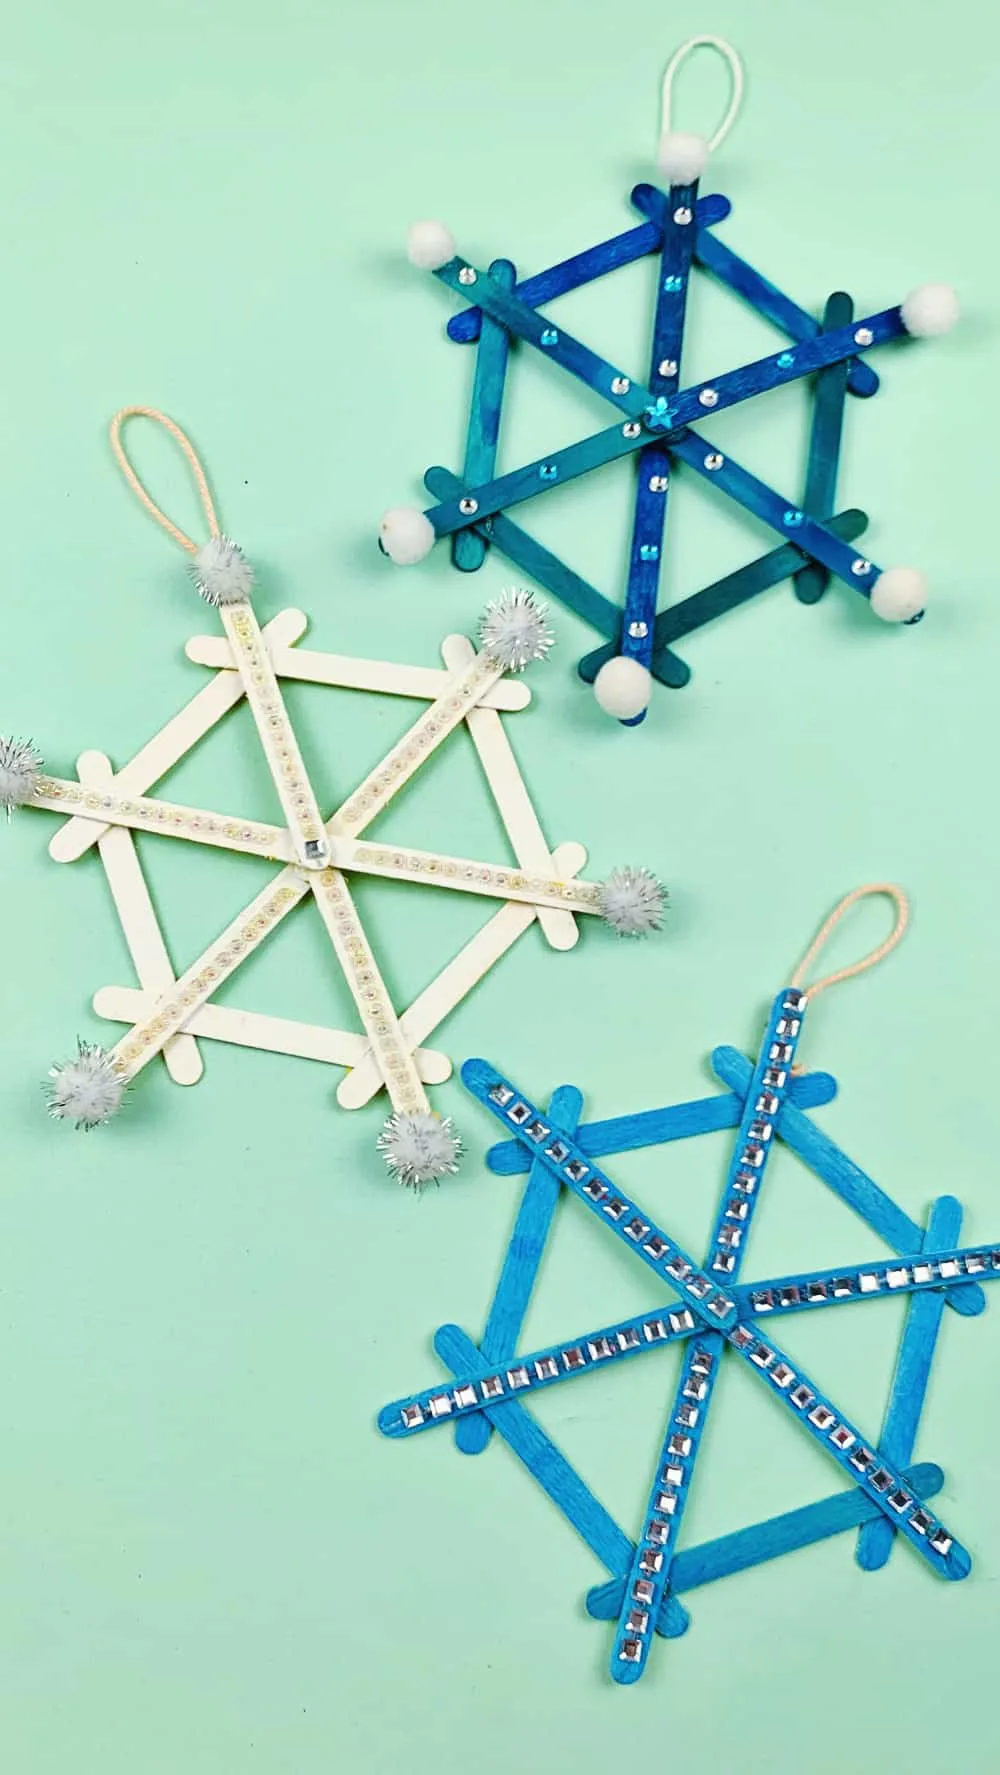 Popsicle Stick Snowflake Craft for Kids - Happy Toddler Playtime